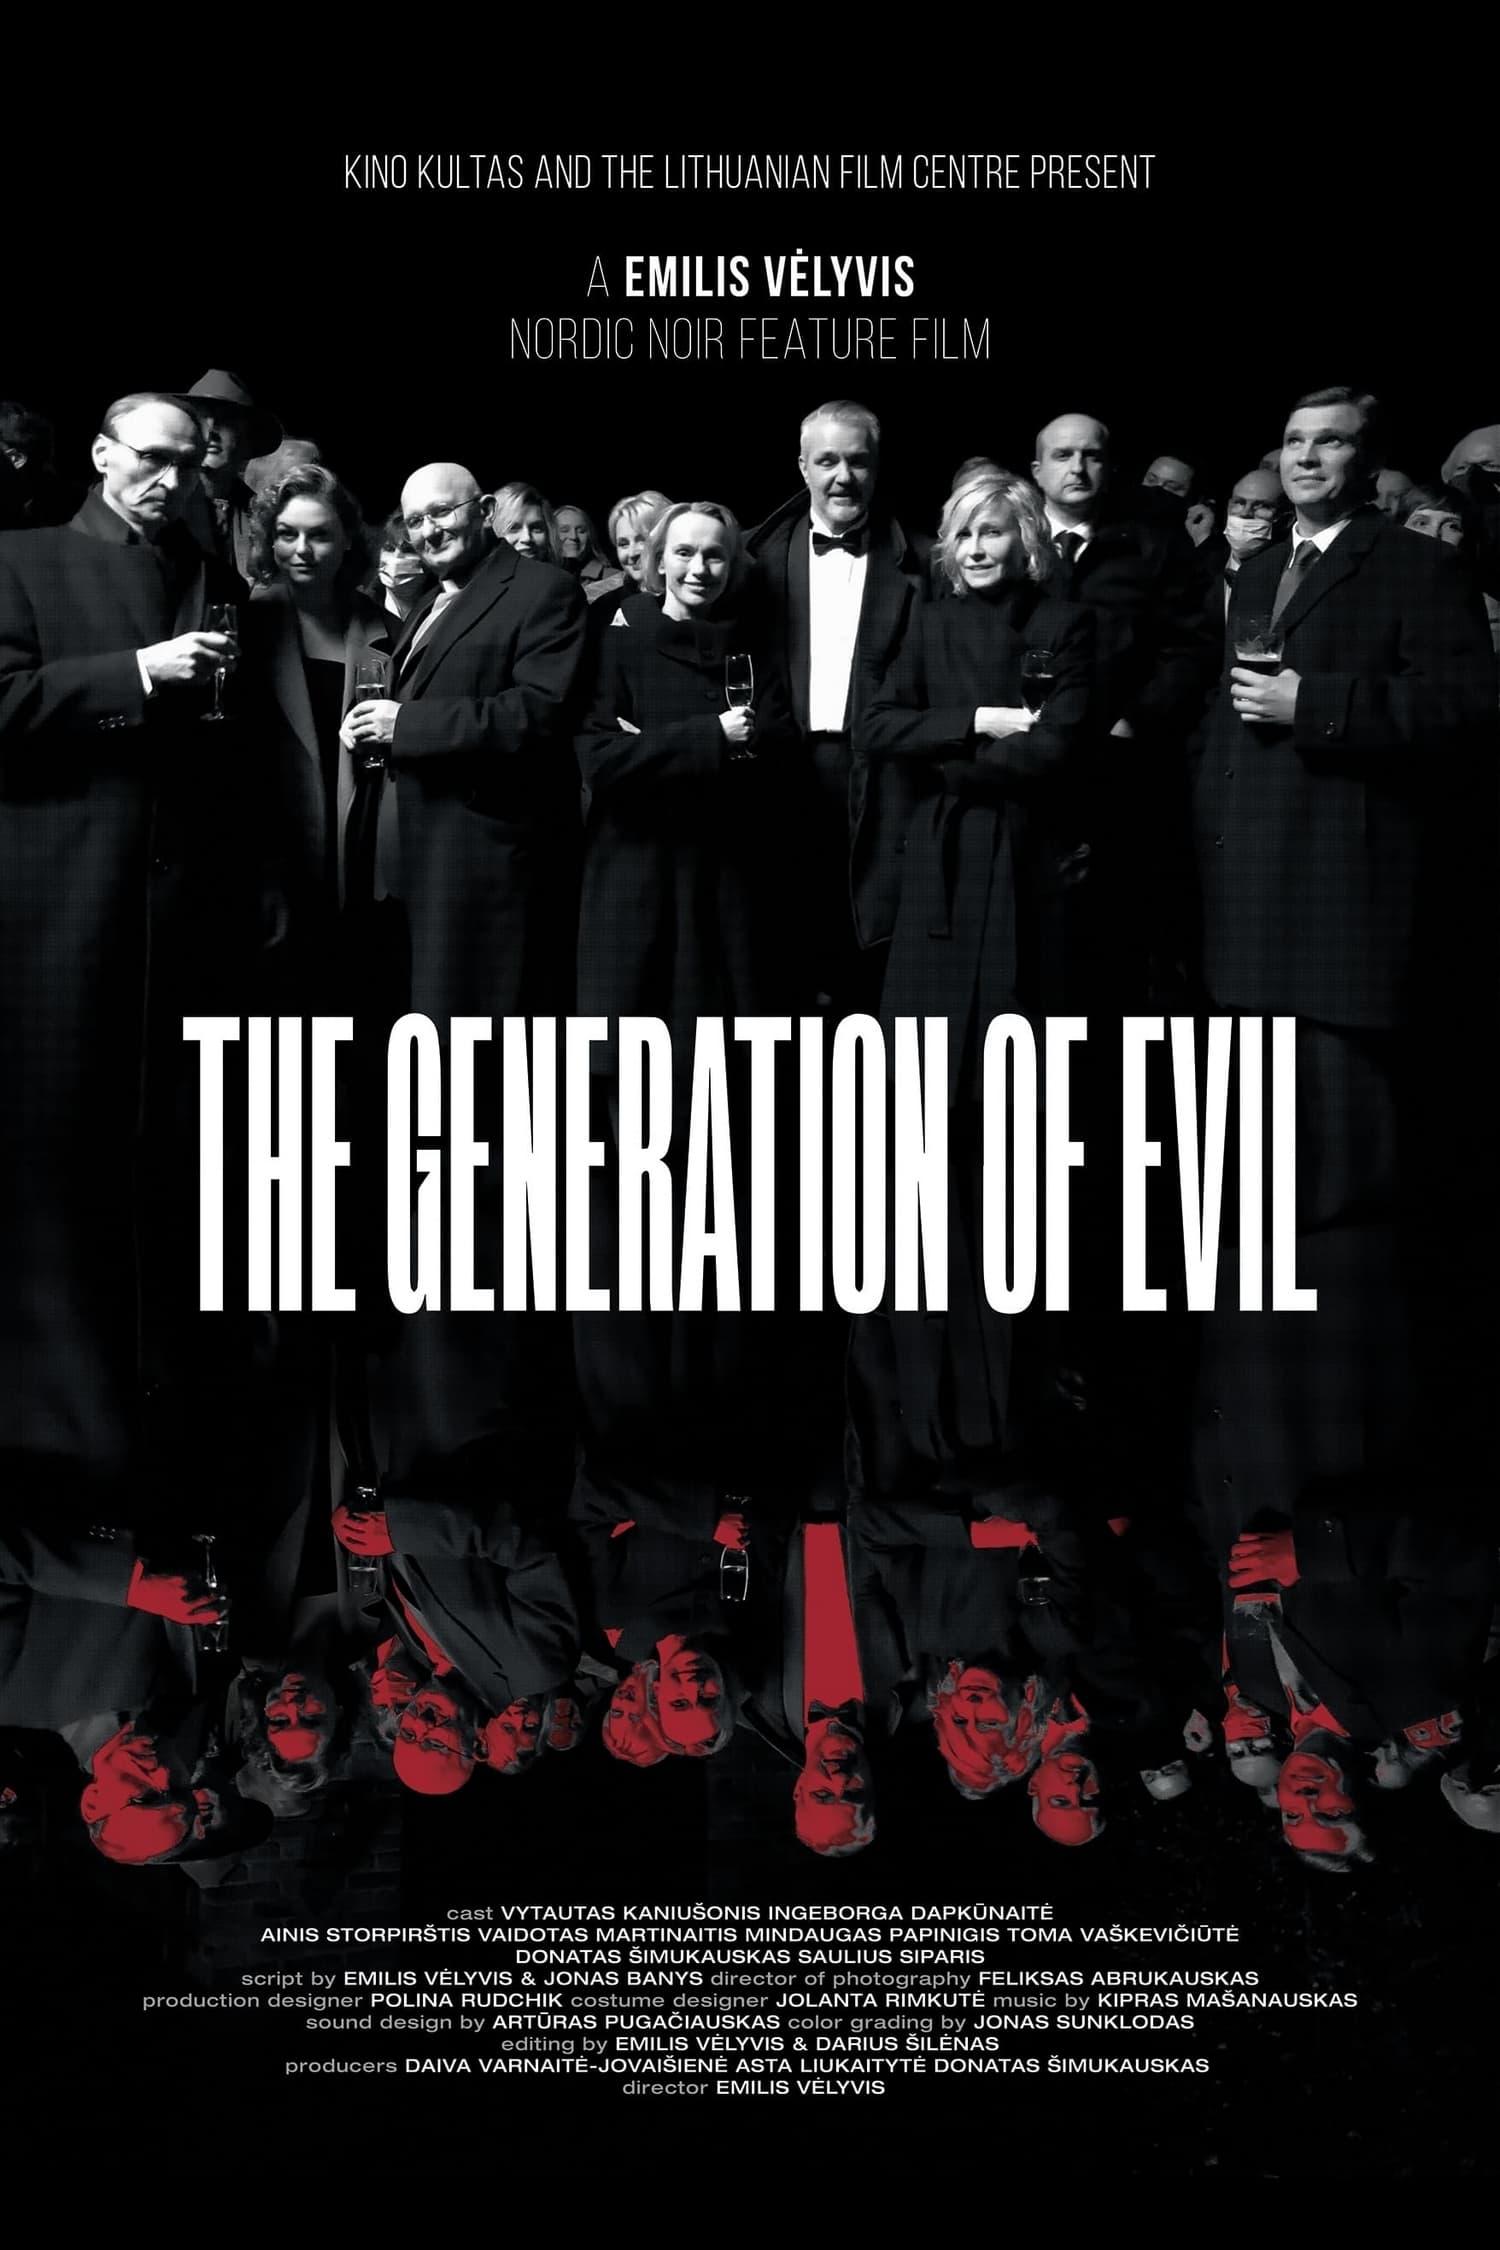 The Generation of Evil poster